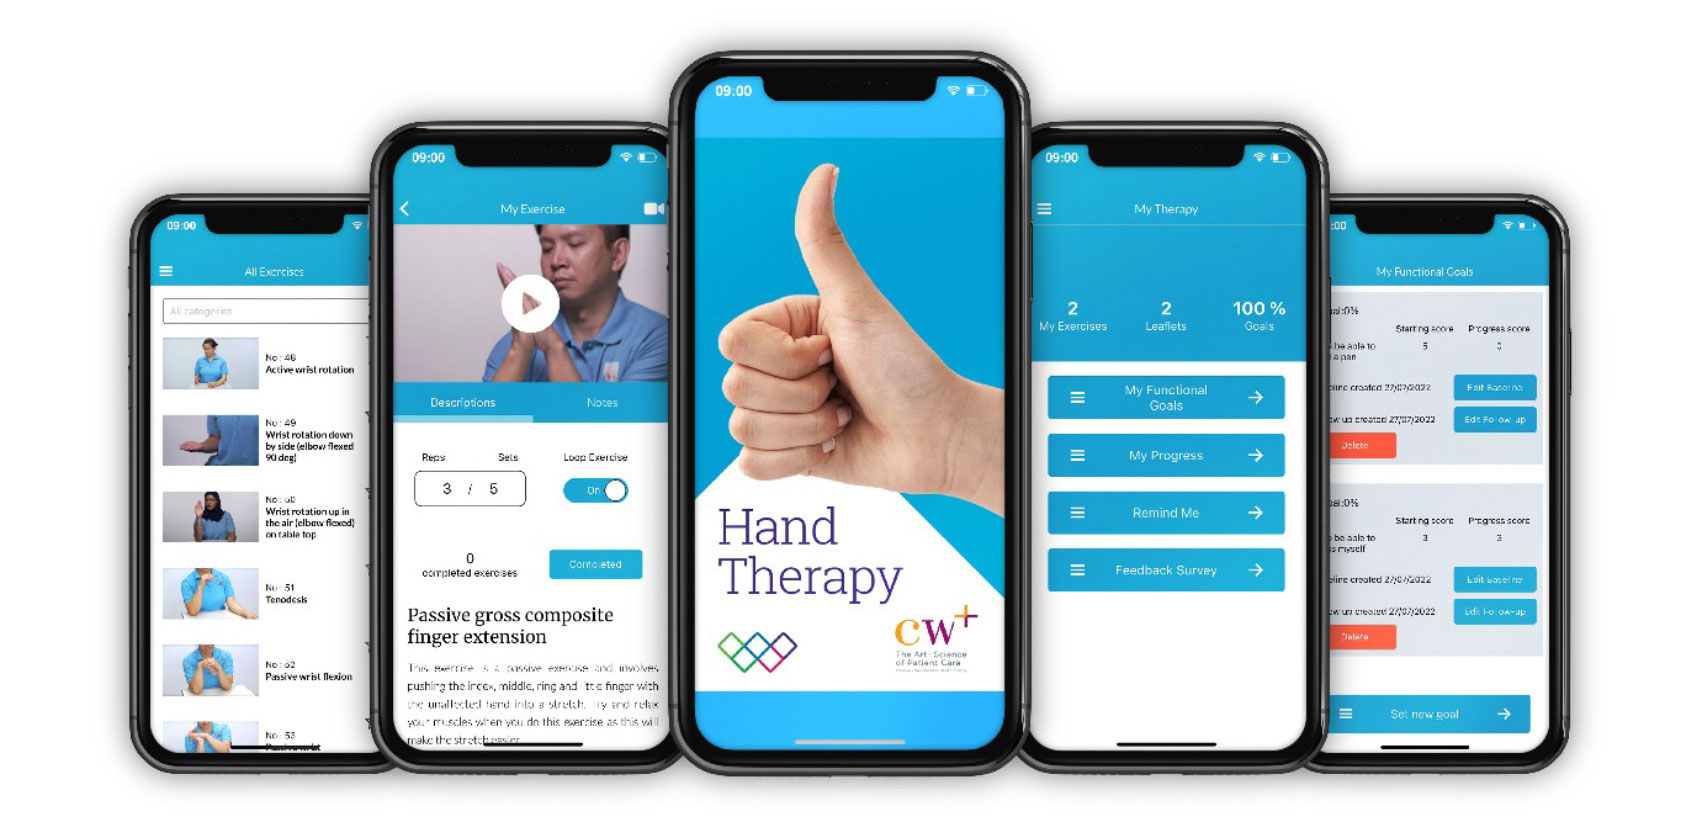 Hand Therapy app